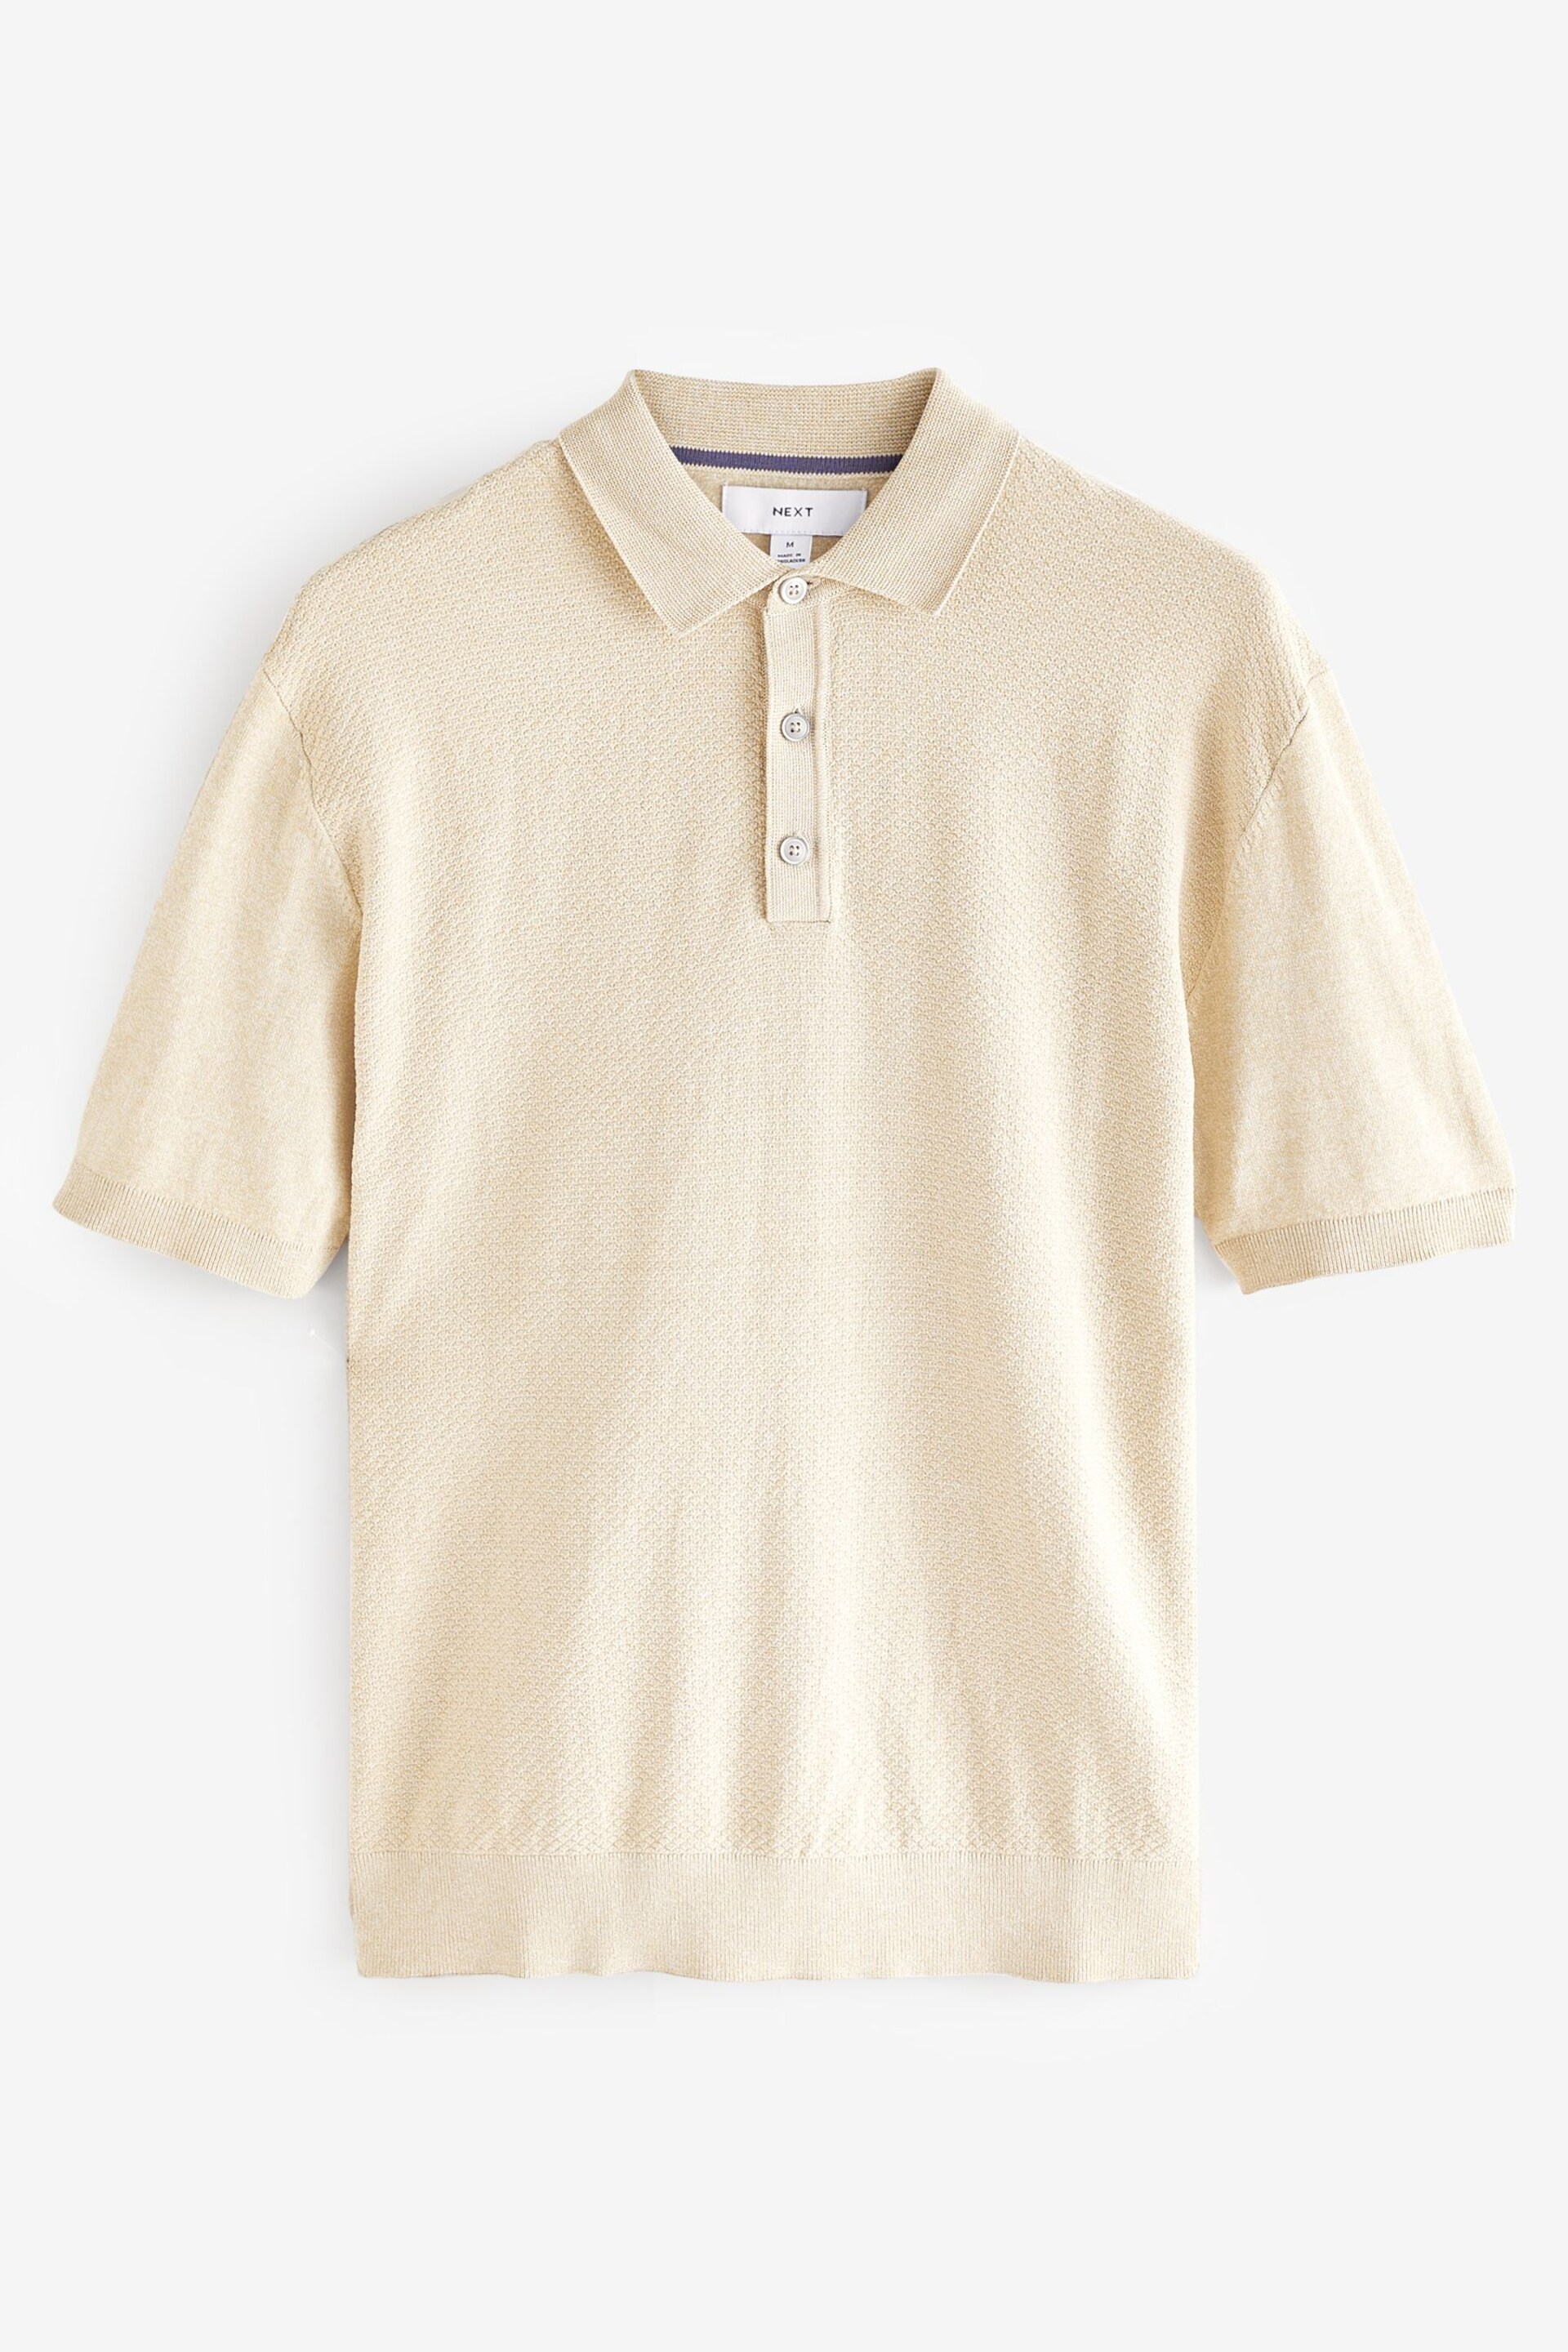 Neutral Knitted Bubble Textured Regular Fit Polo Shirt - Image 5 of 7